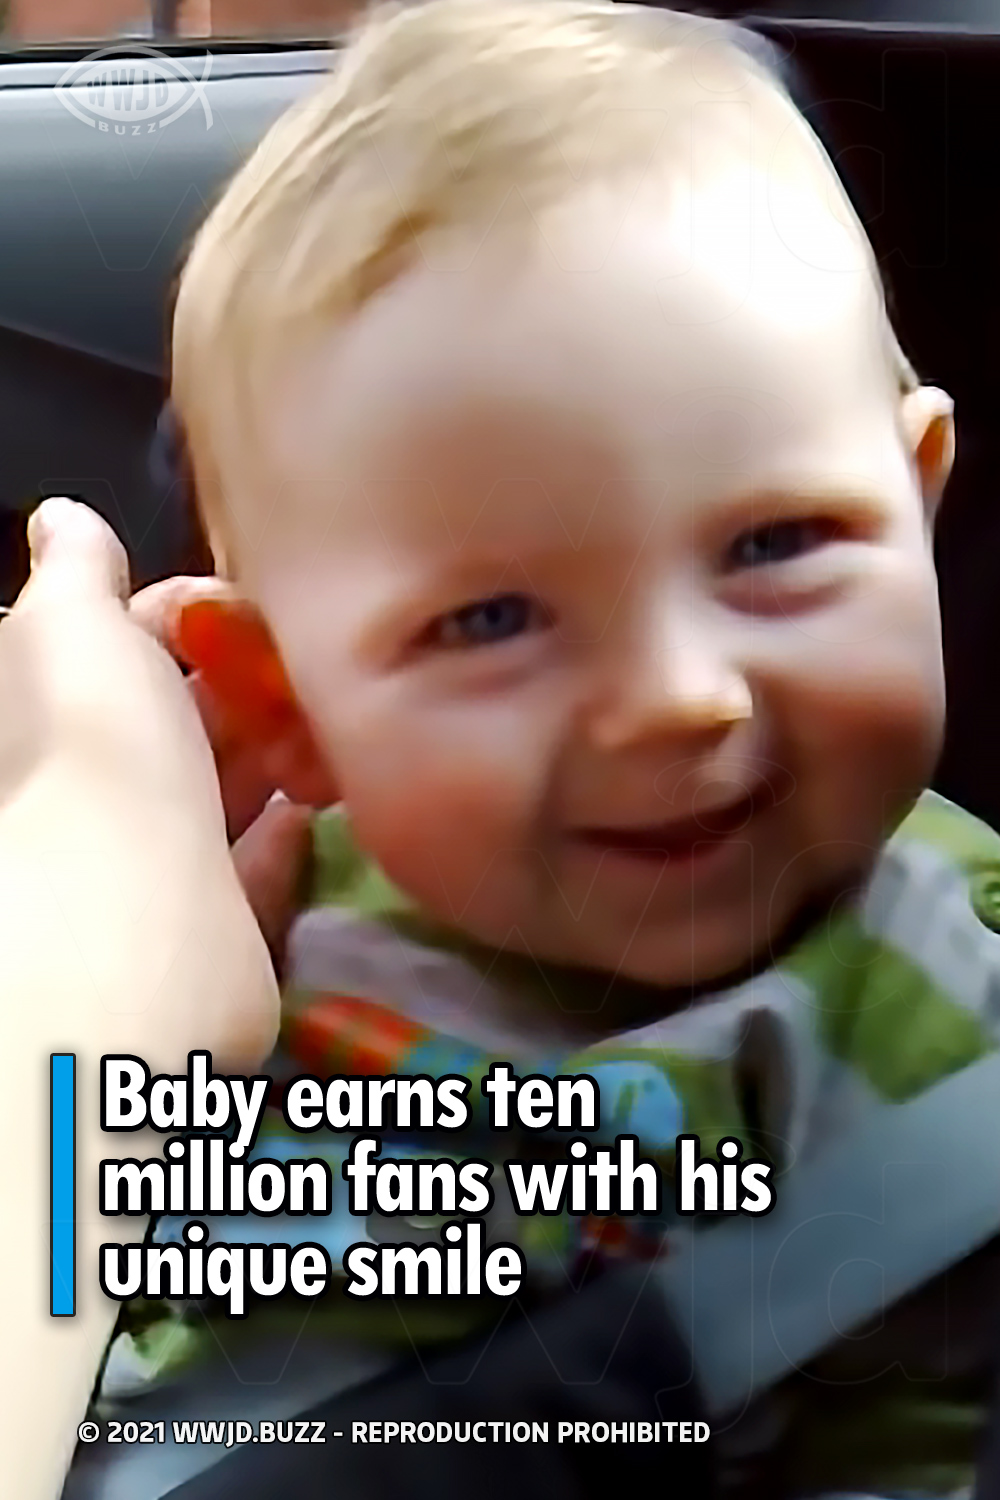 Baby earns ten million fans with his unique smile